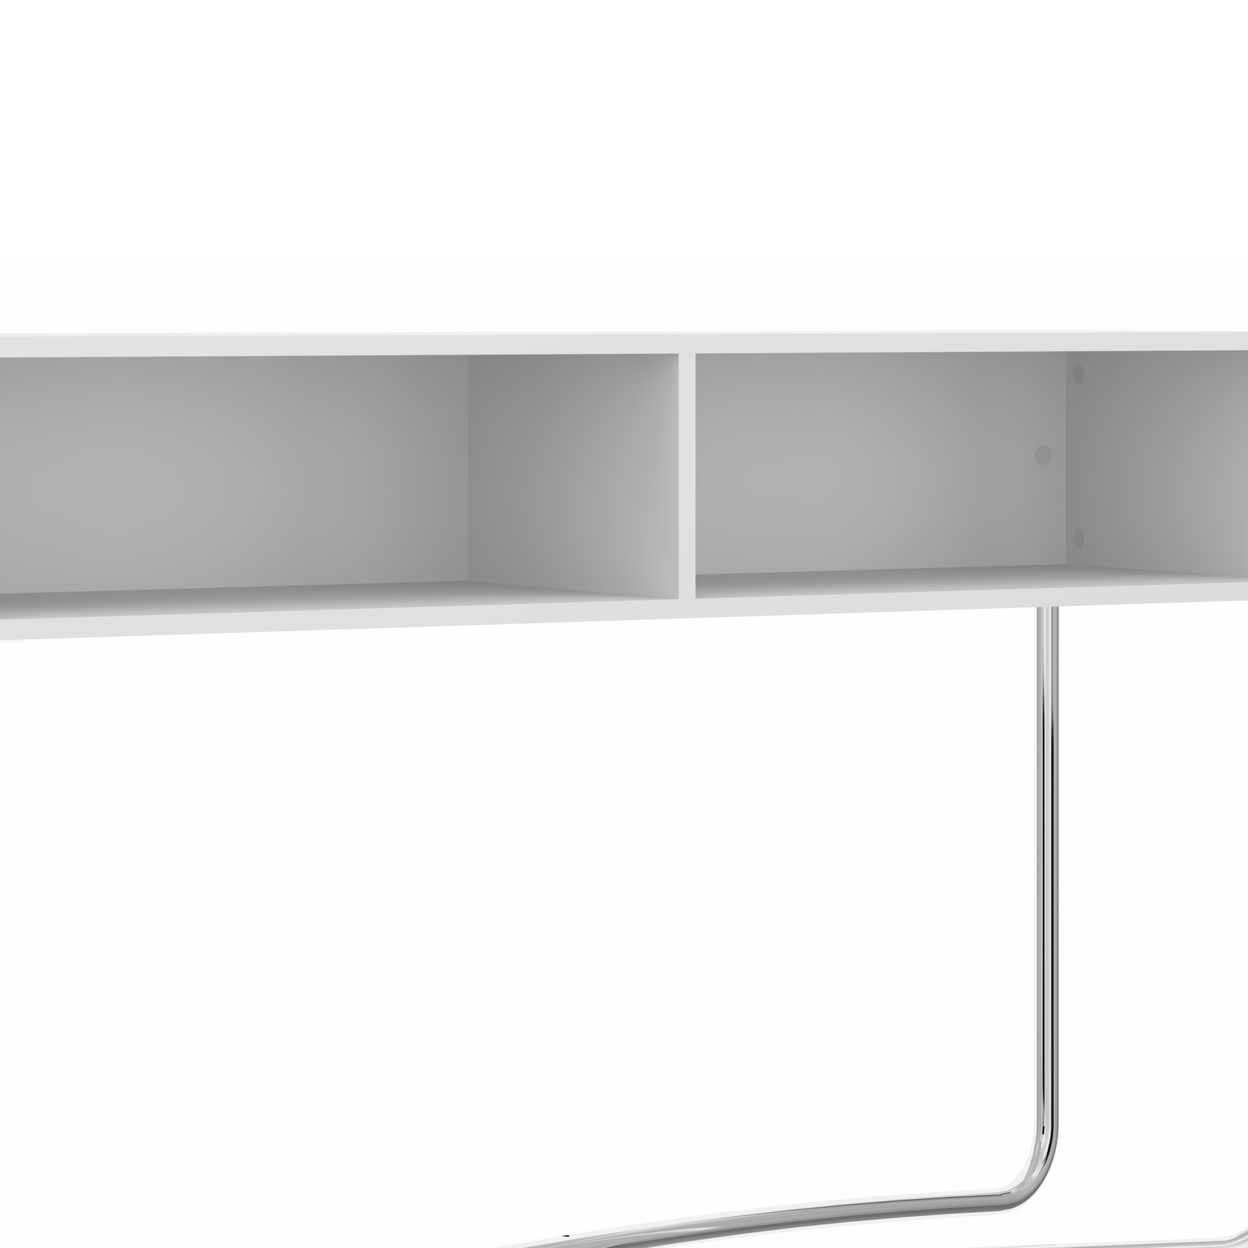 Wooden Console Table With 2 Open Compartments And Metal Frame, White And Chrome- Saltoro Sherpi